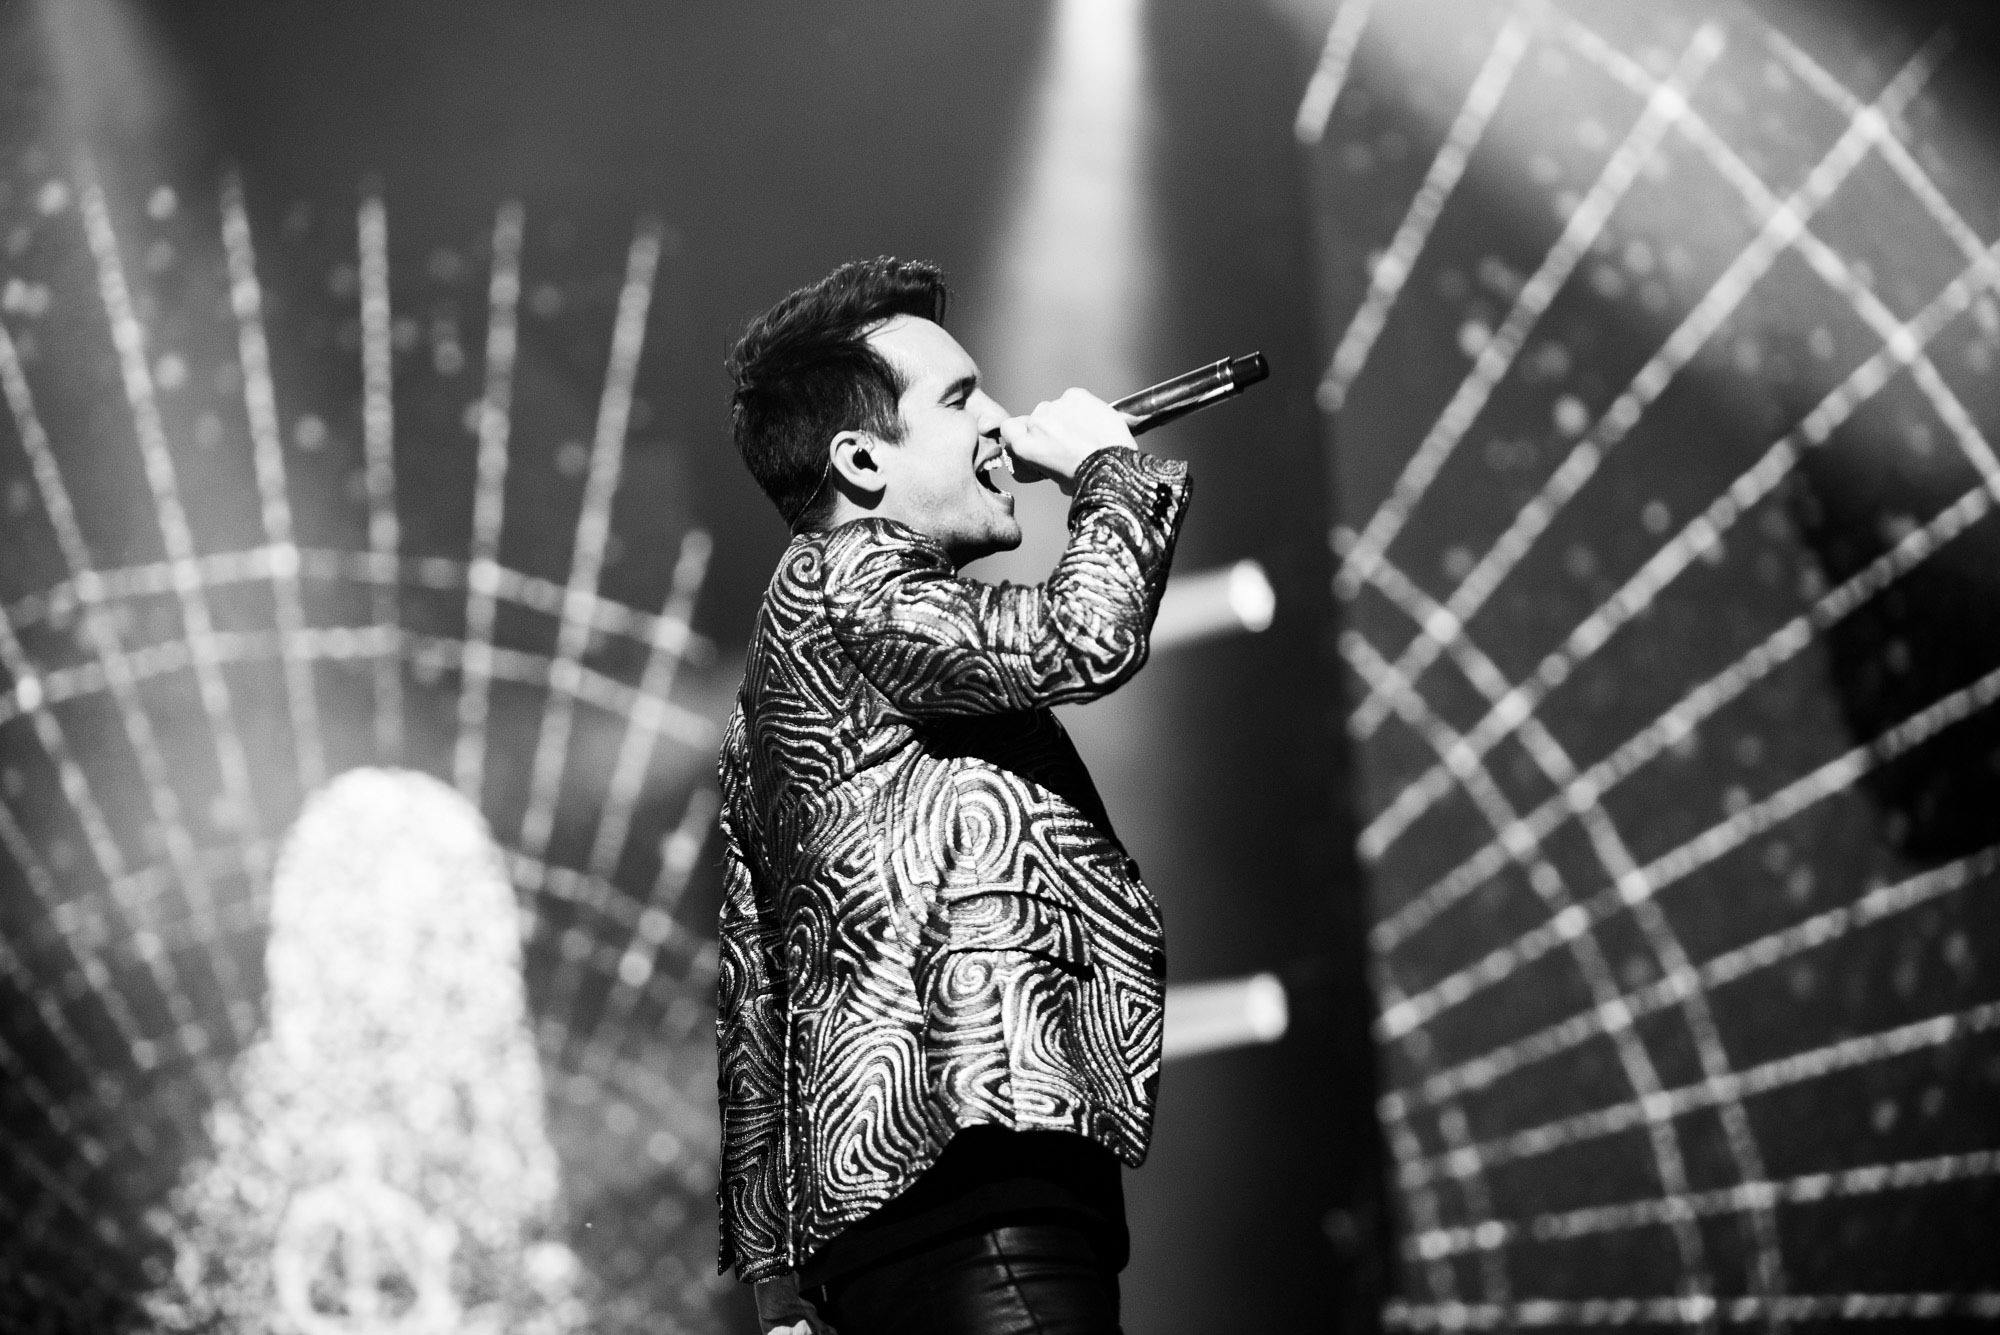 Gallery: Panic! At The Disco's Pray For The Wicked Tour Hits The UK